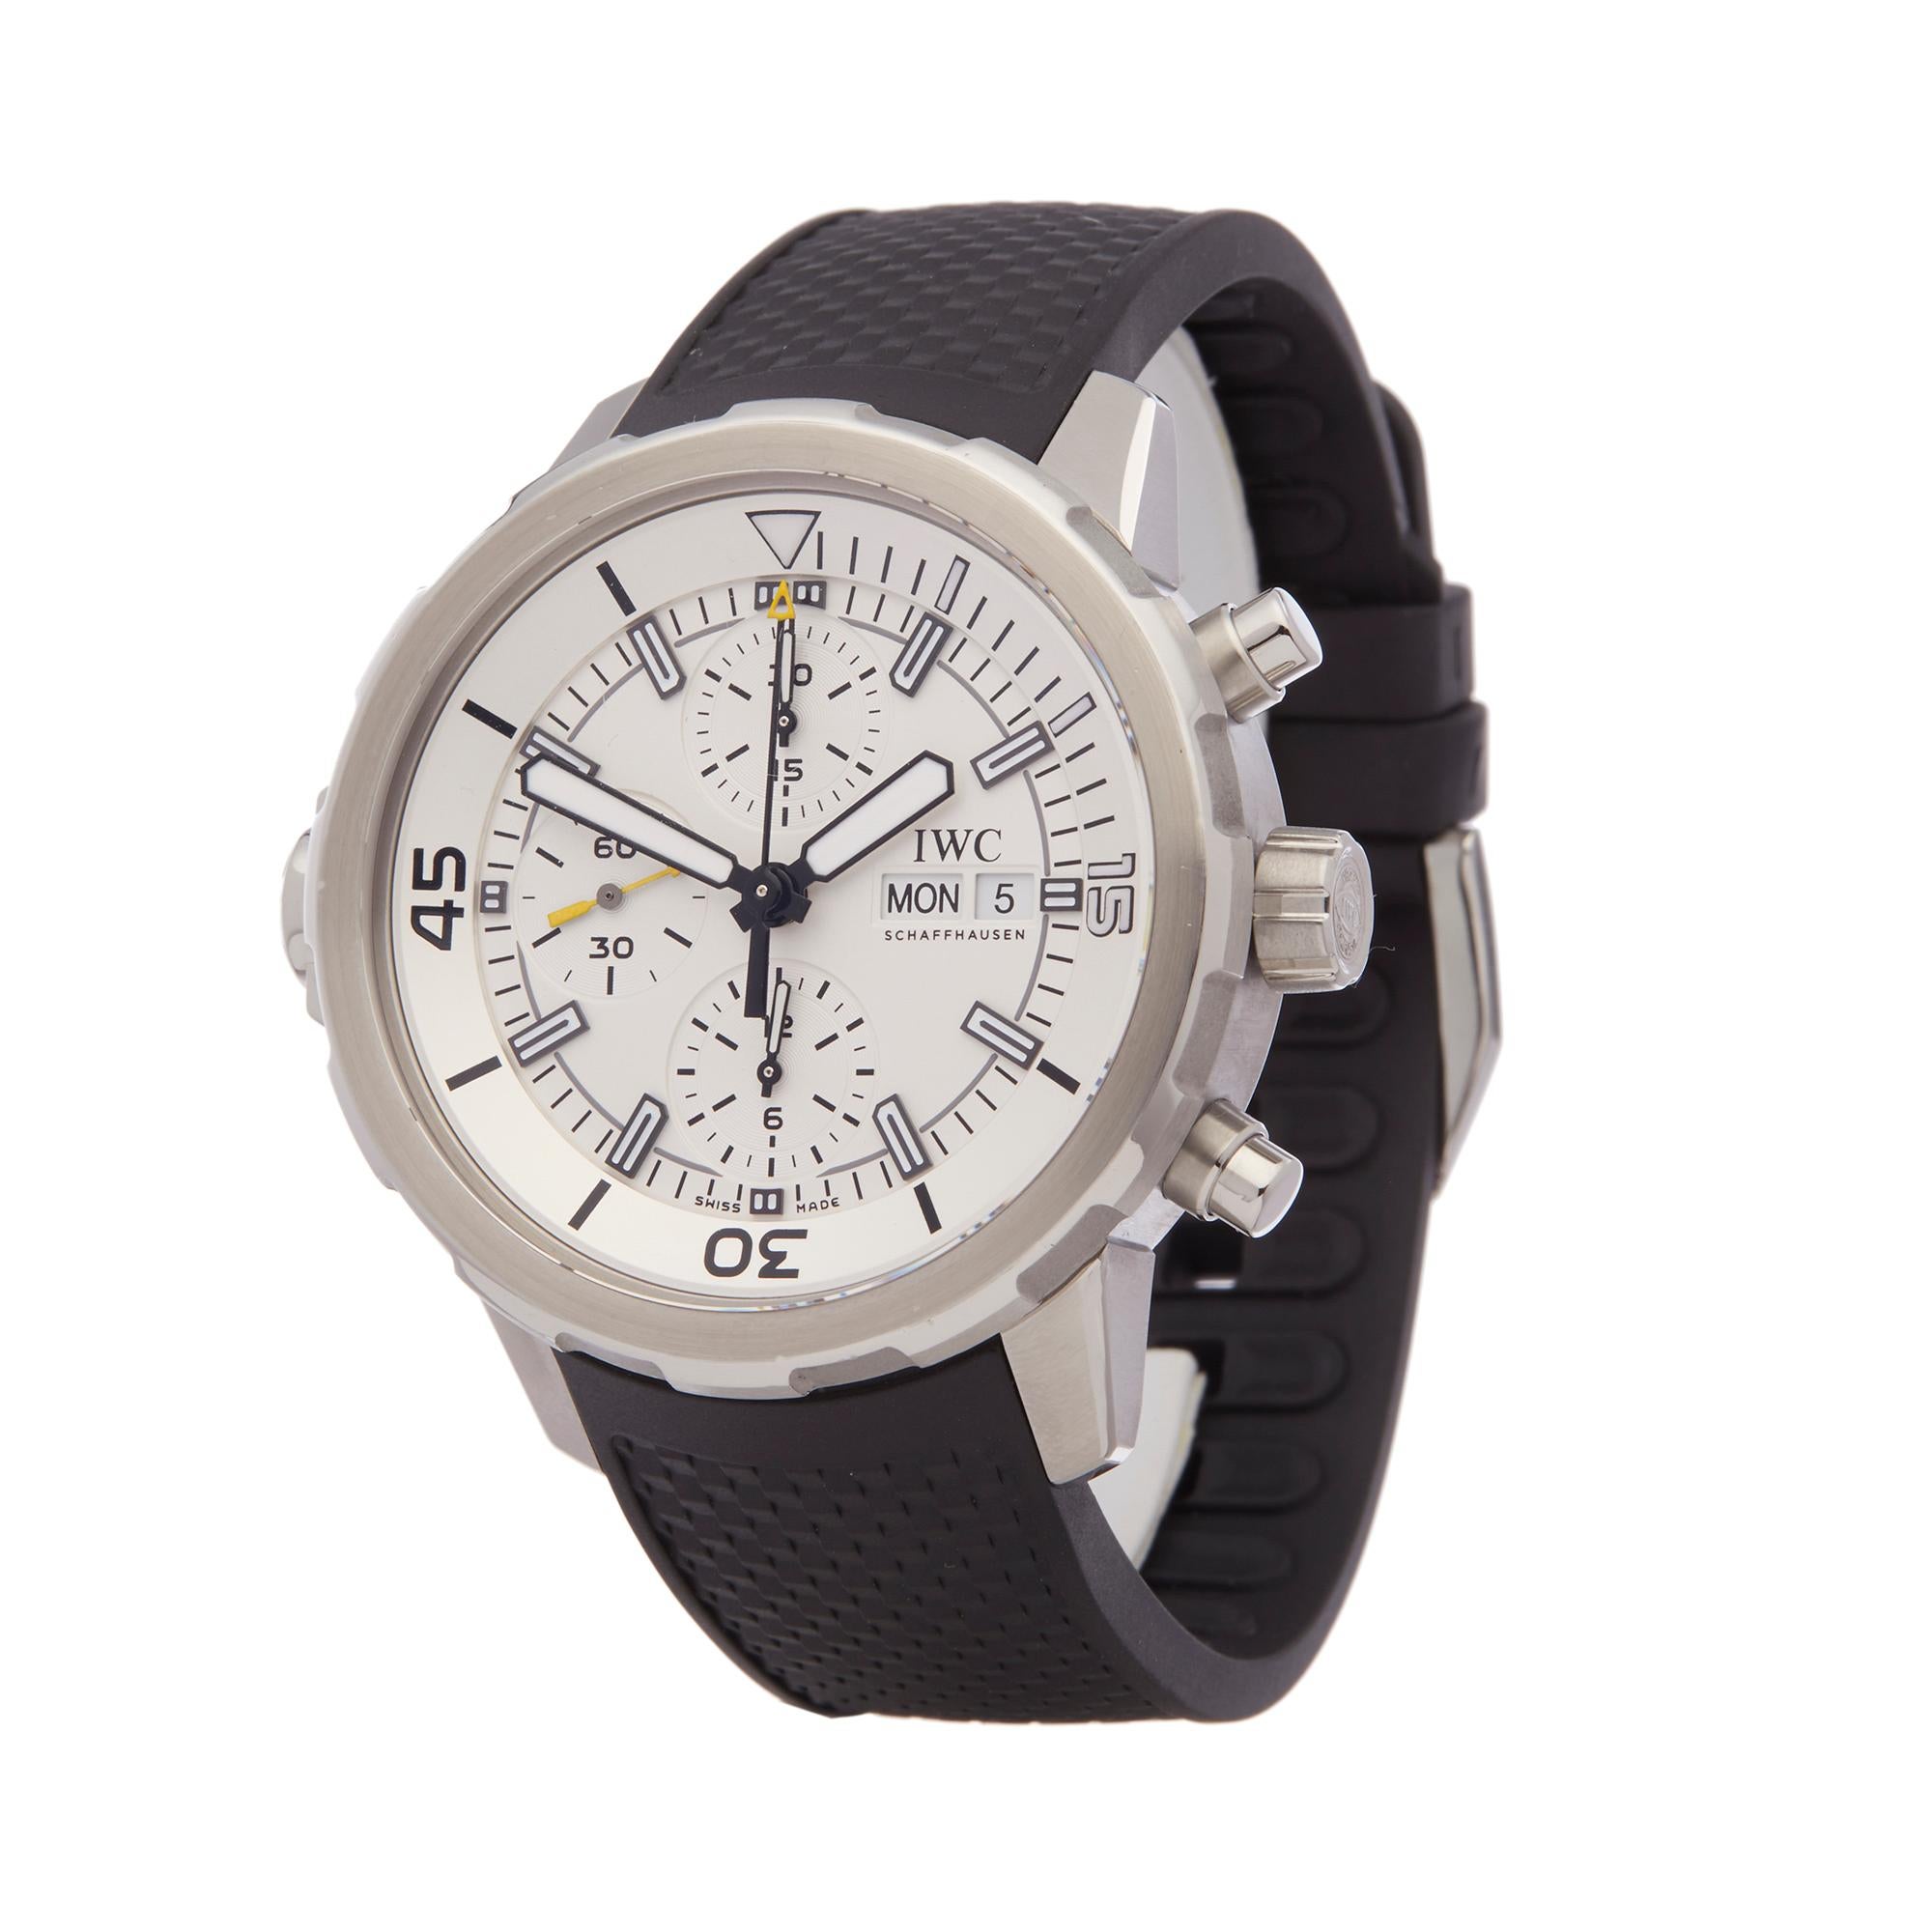 Ref: W6193
Manufacturer: IWC
Model: Schaffhausen Aquatimer 
Model Ref: IW376801
Age: 15th September 2015
Gender: Mens
Complete With: Box, Manuals, Guarantee, Cleaning Cloth and Service Pouch & Papers dated 28th June 2019
Dial: White Baton
Glass: